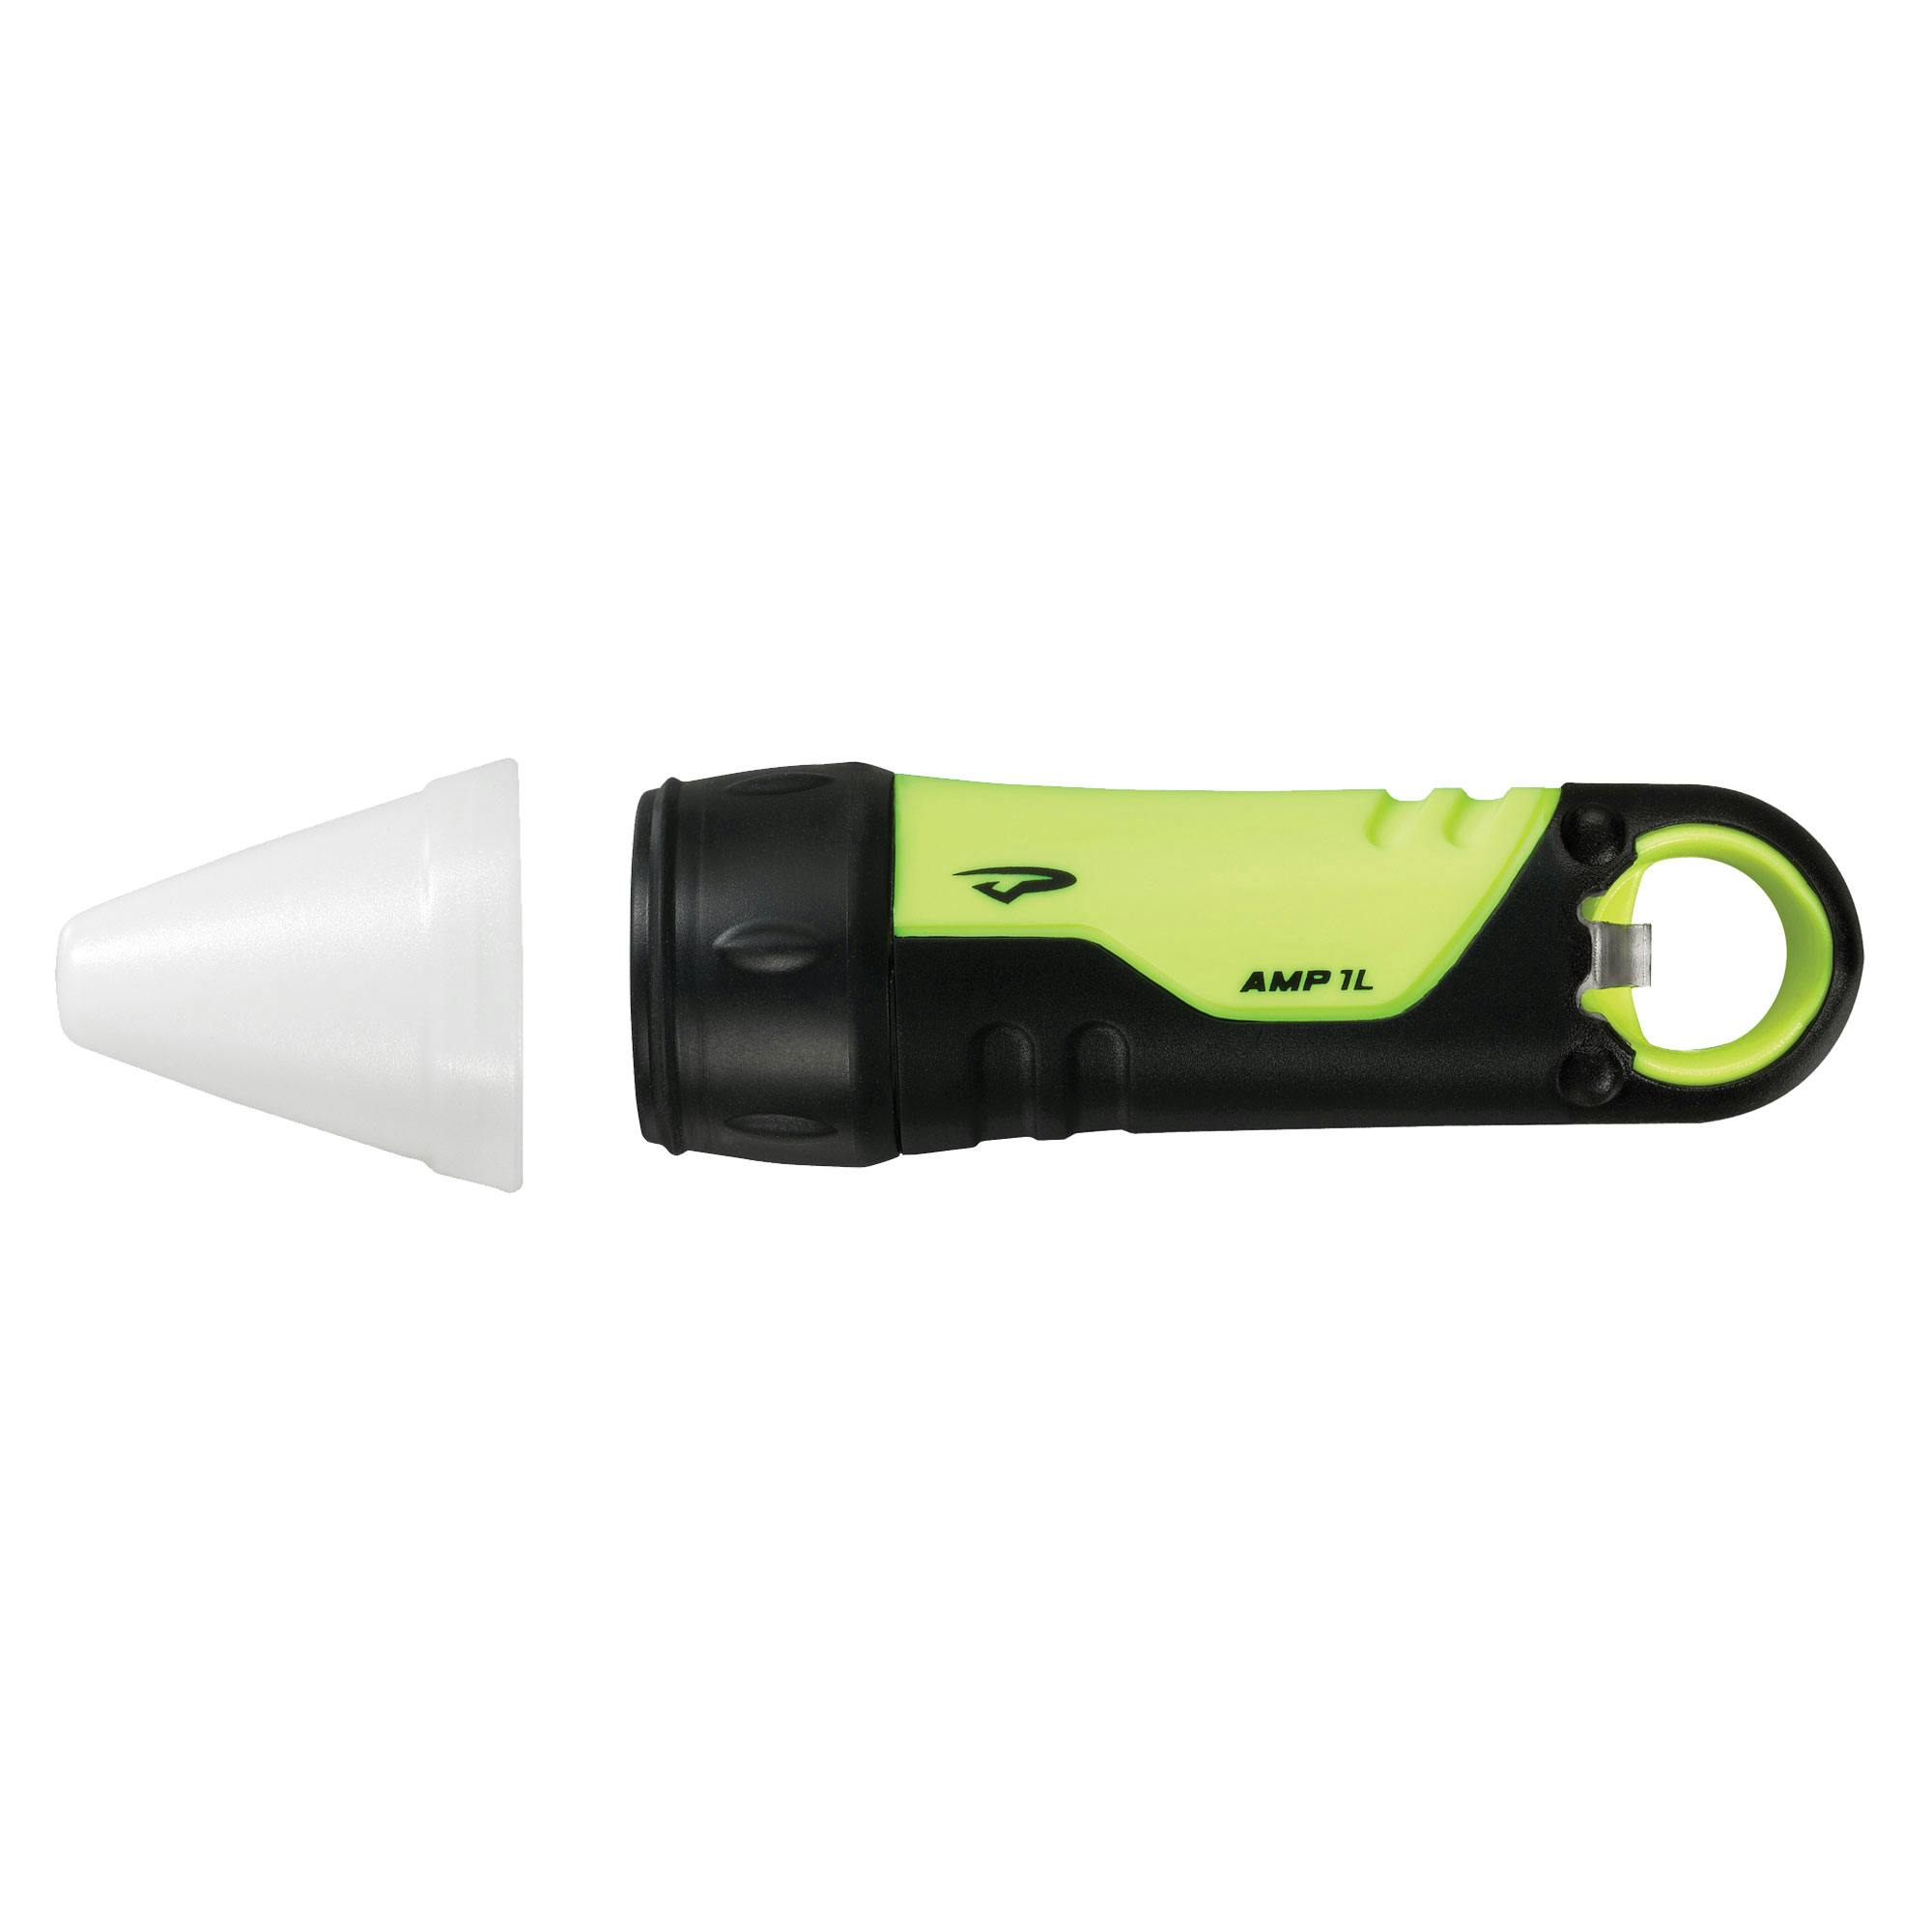 Princeton Tec Amp 1L 100LM Handheld Light with Cone and Churchkey - Yellow